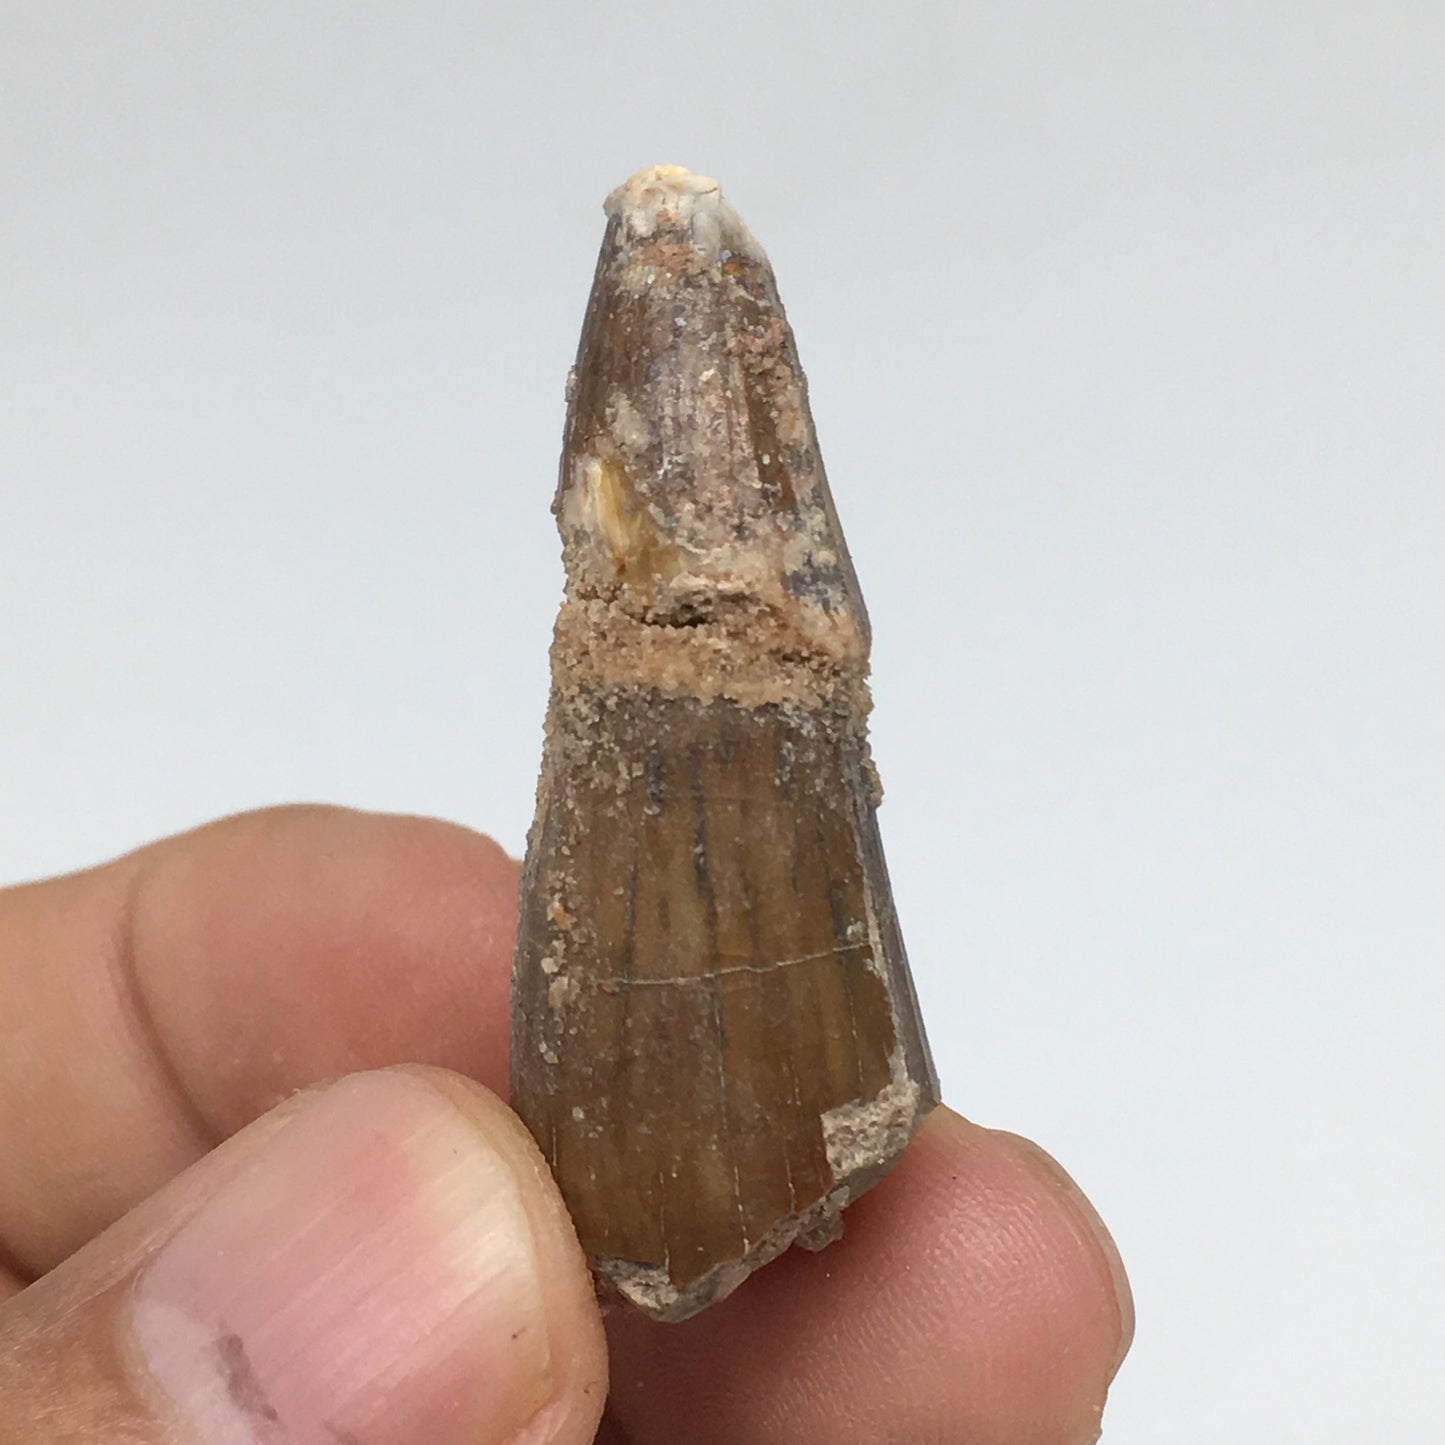 7.8g,1.5"X 0.7"x 0.6" Rare Natural Small Fossils Spinosaurus Tooth @Morocco,F186